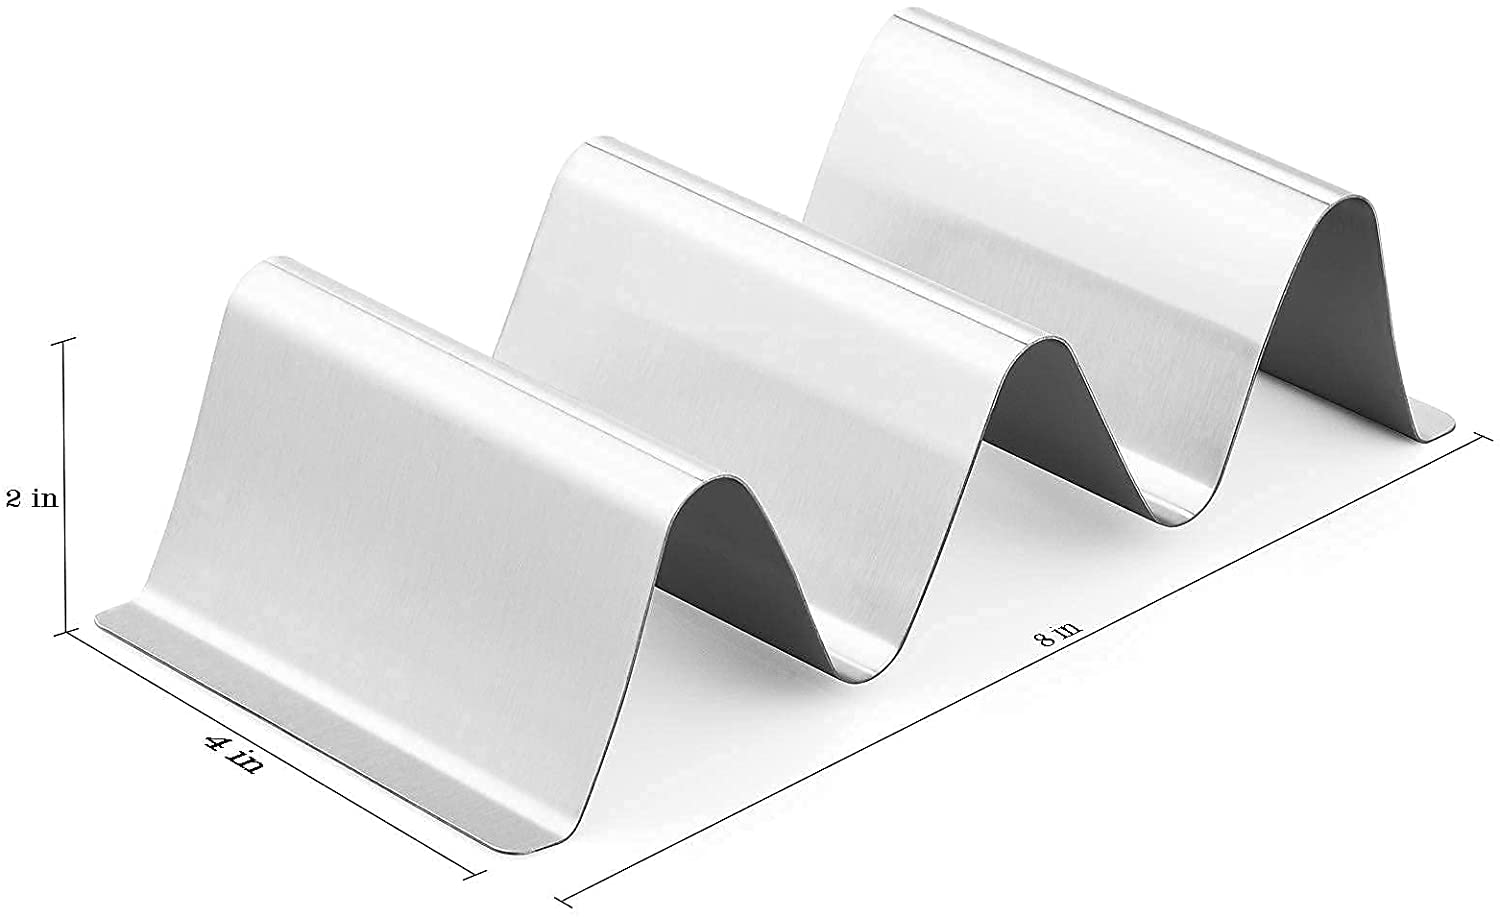 Set of 6 Stainless Steel Taco Stand/Tray